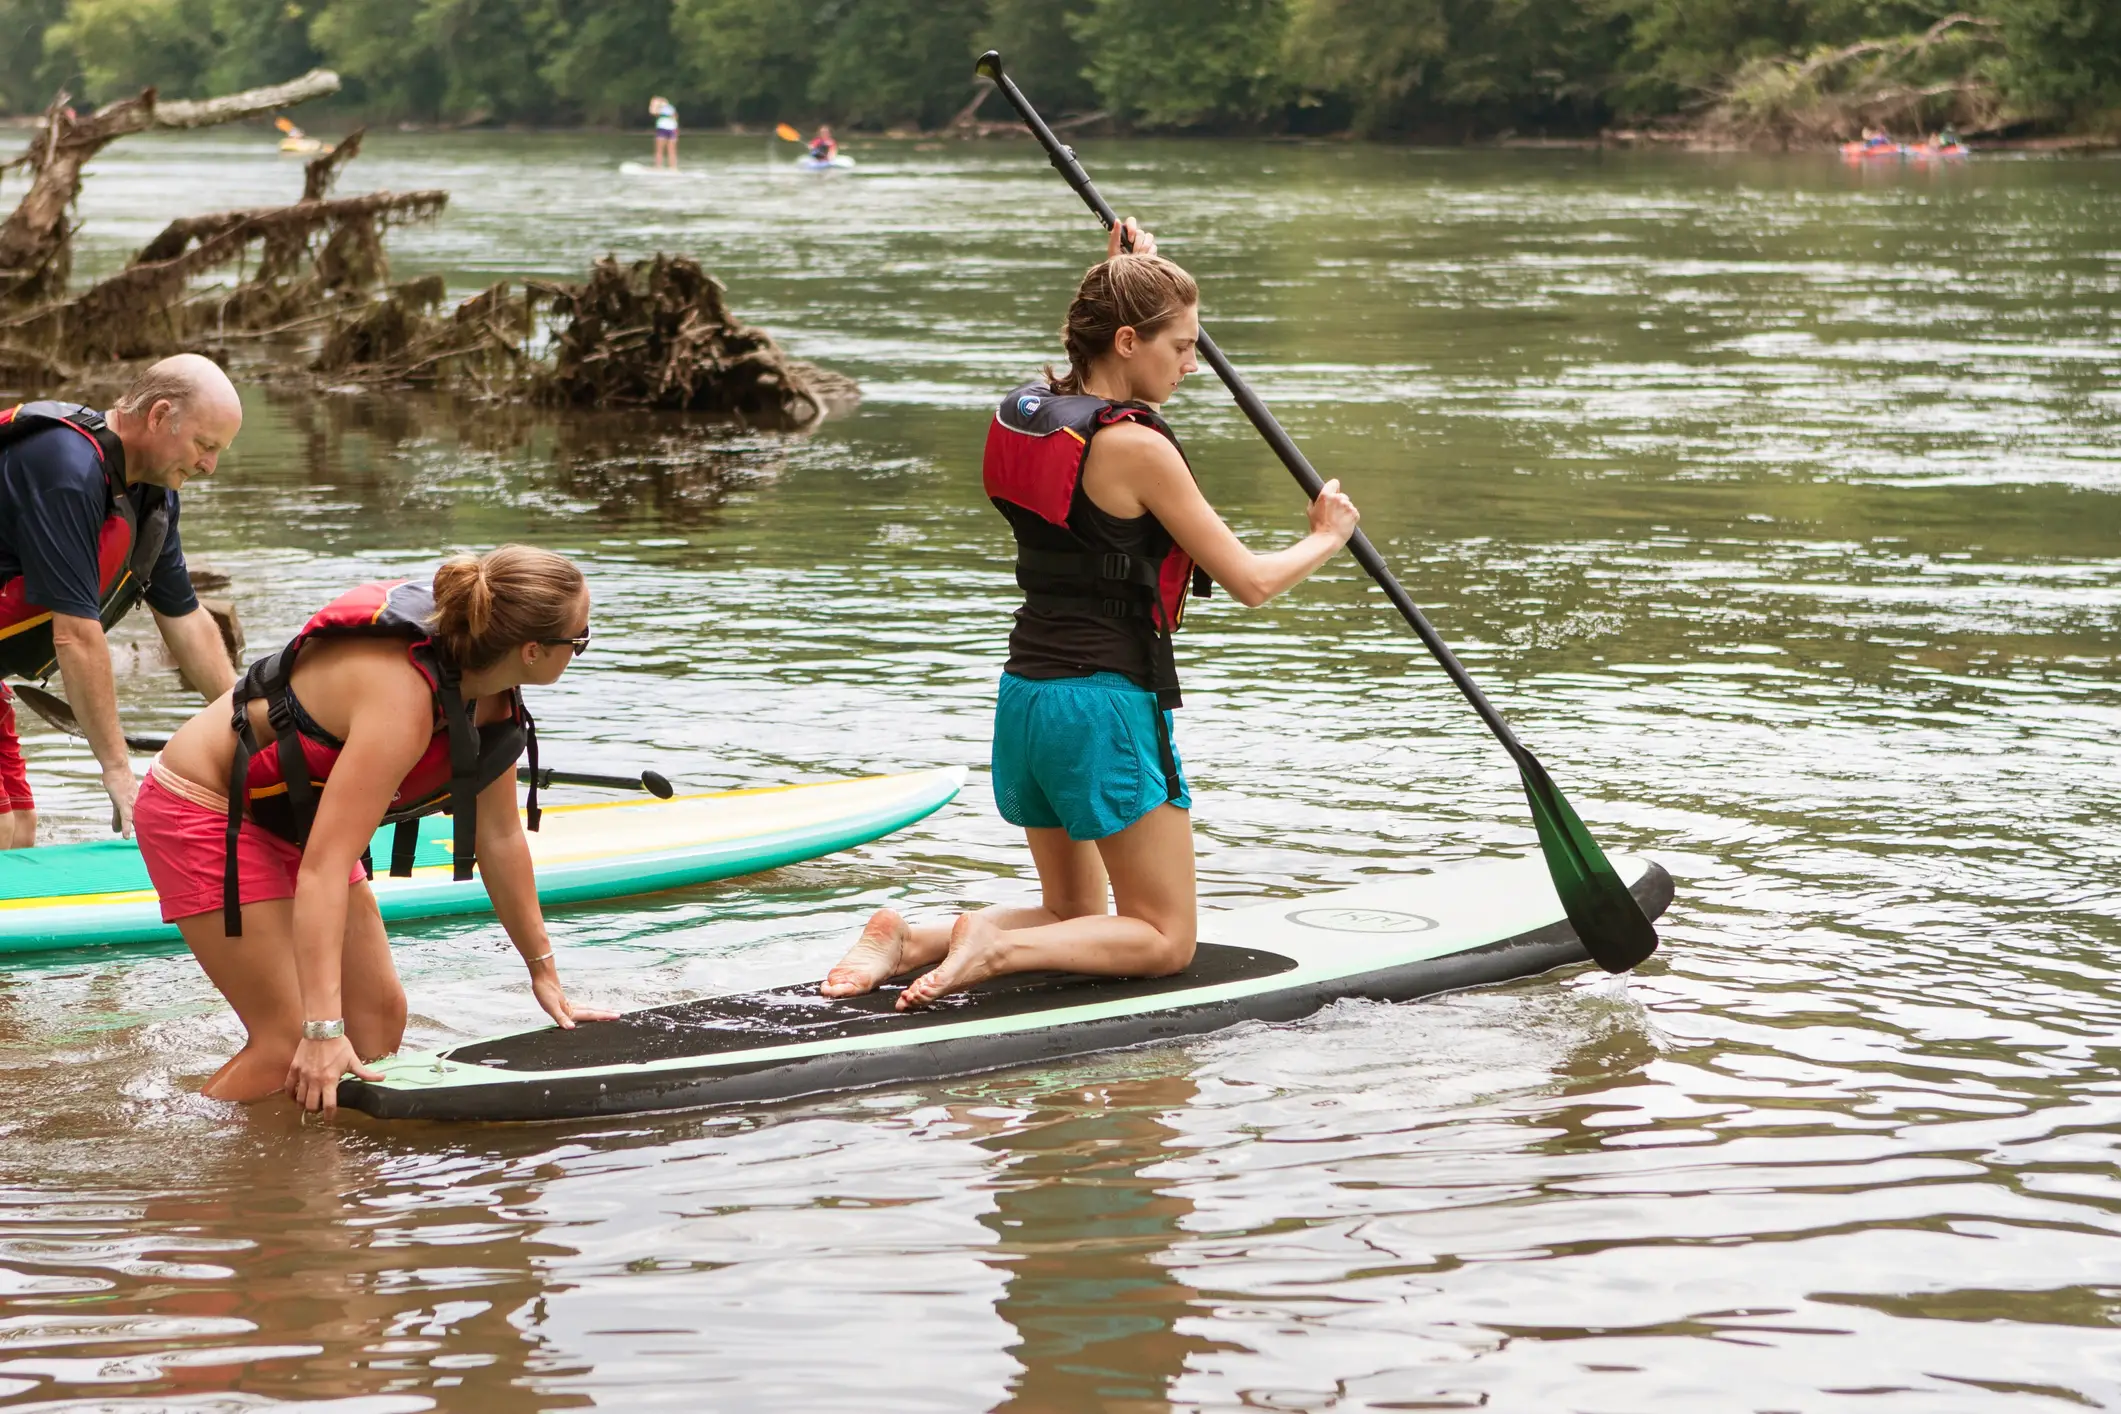 Woman Paddle Boarding in River